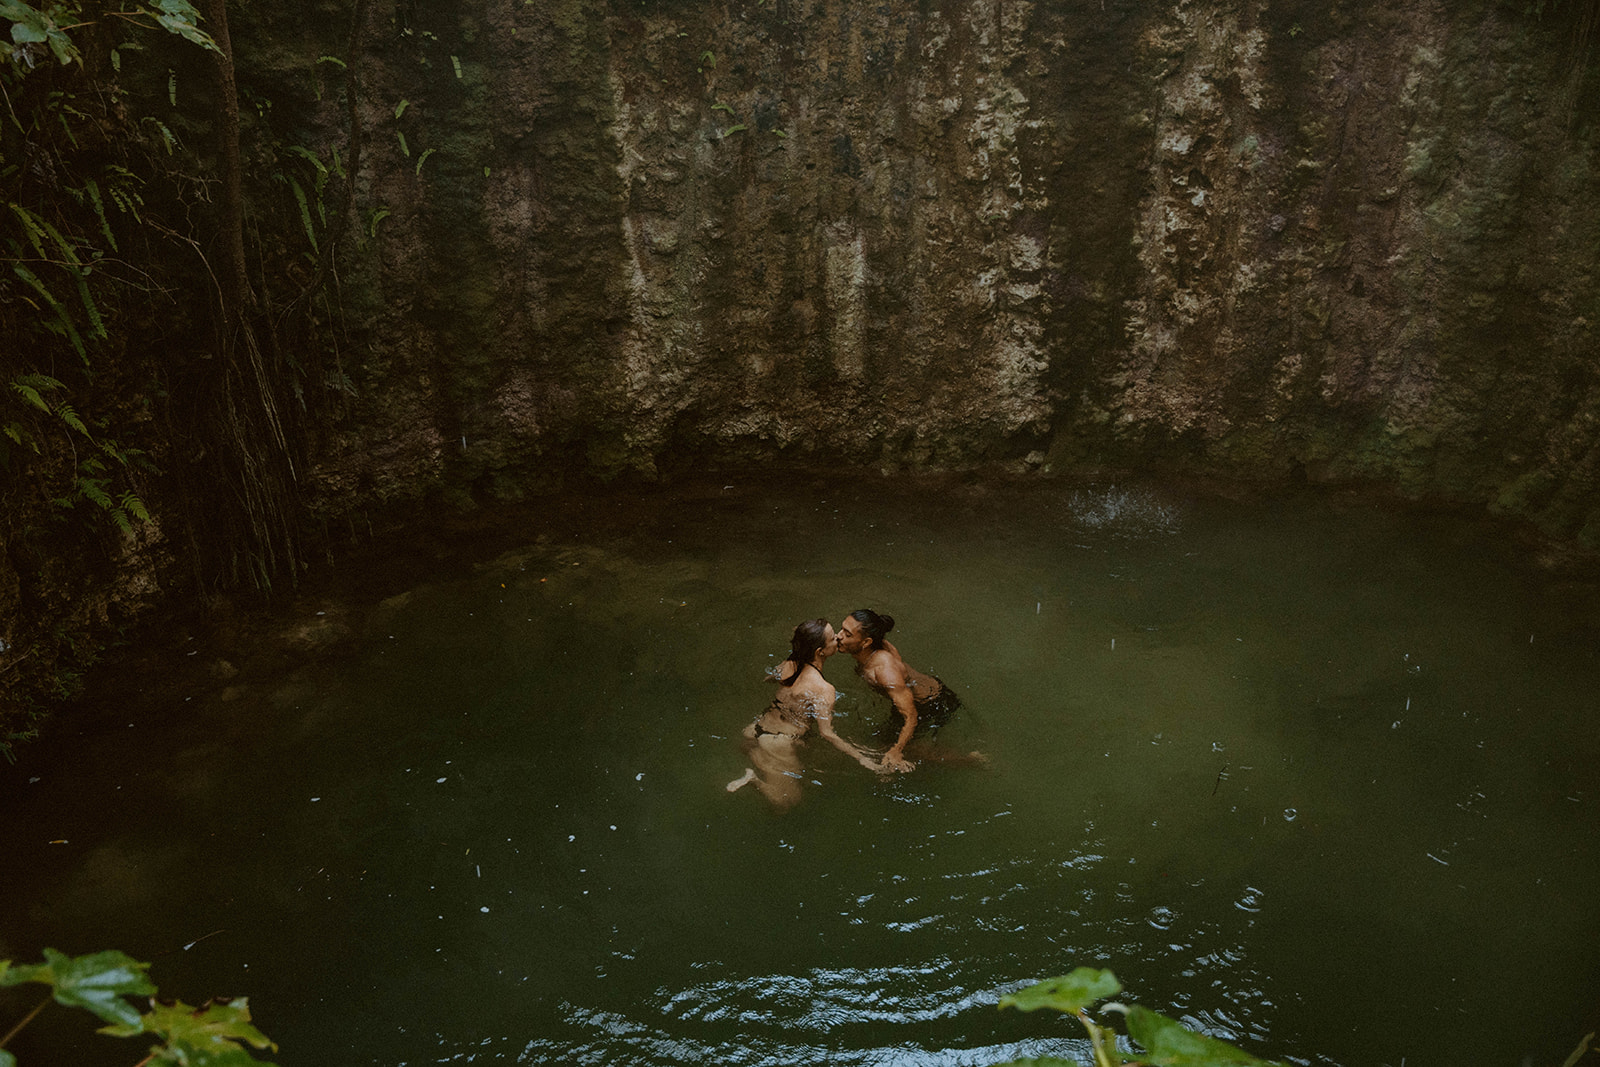 A Luxury Elopement in Tulum, Mexico by Rachel Bond Photography